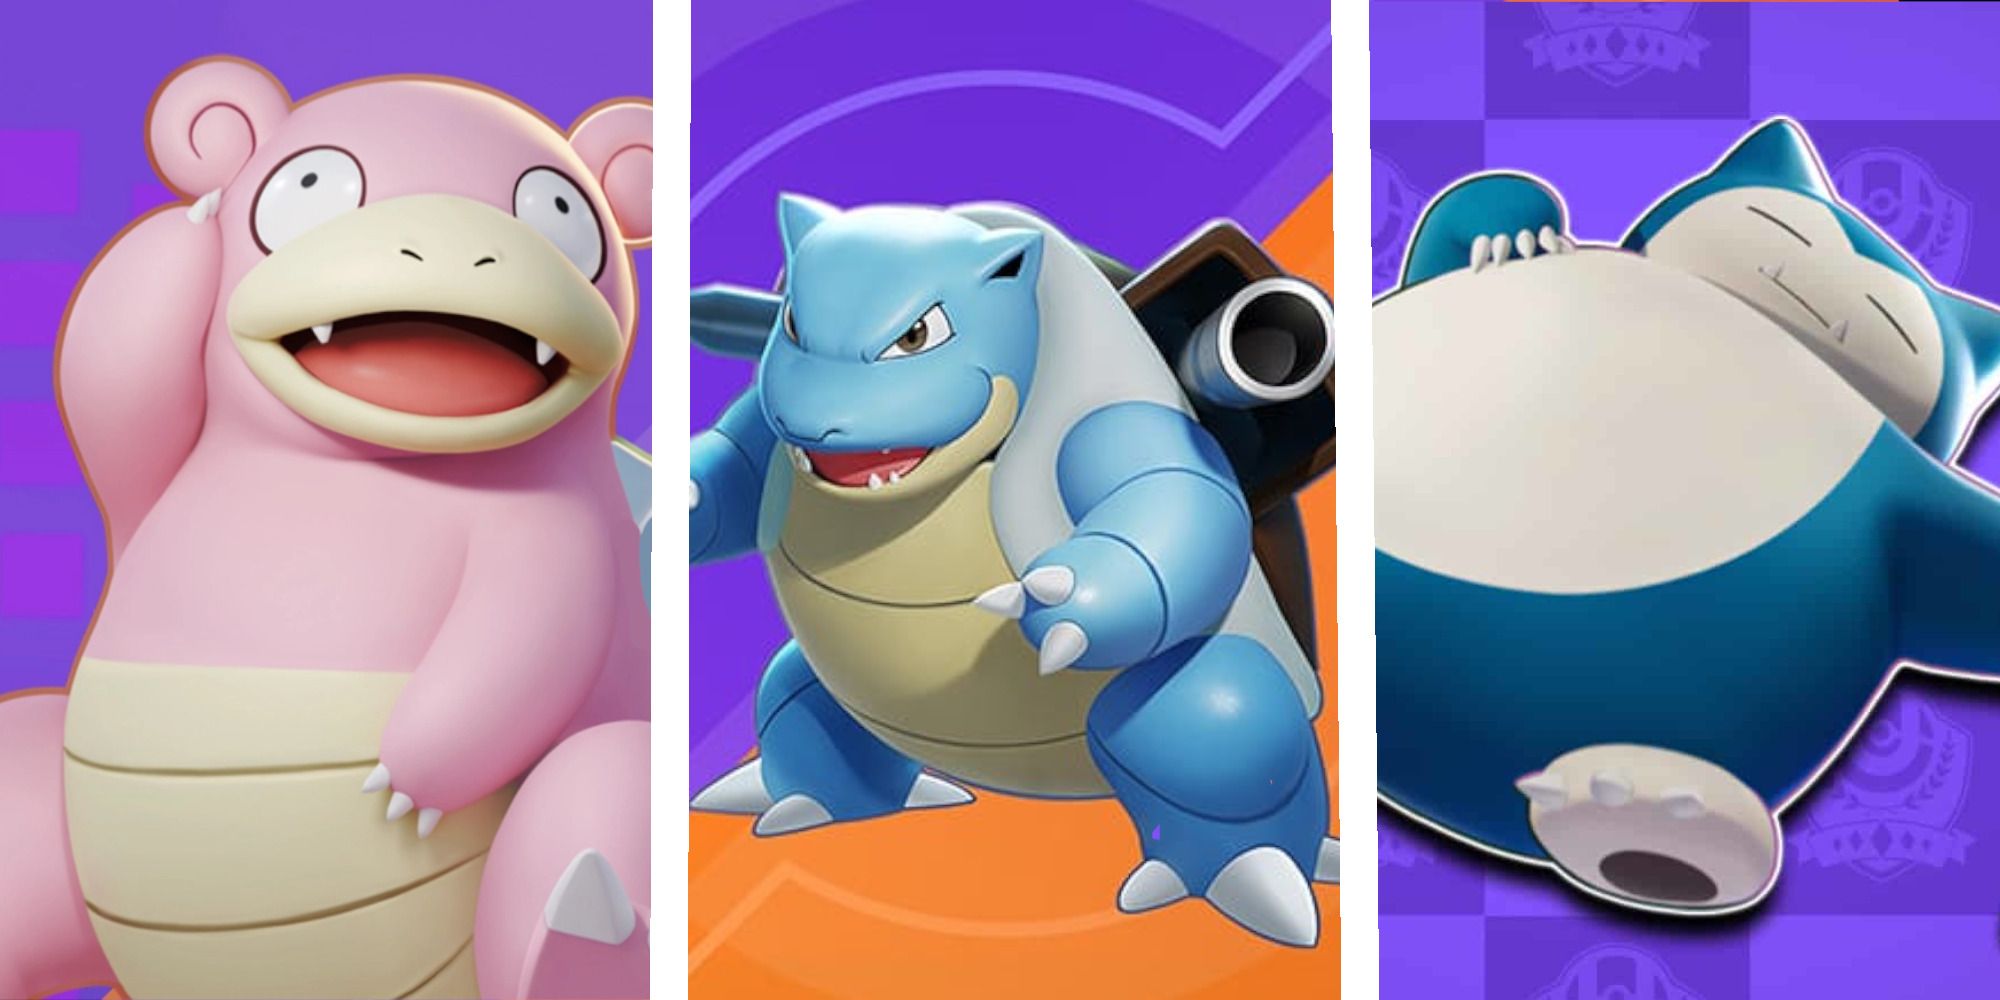 Best Defender Items For Pokemon Unite Feature Image with Slowbro, Snorlax, and Blastoise